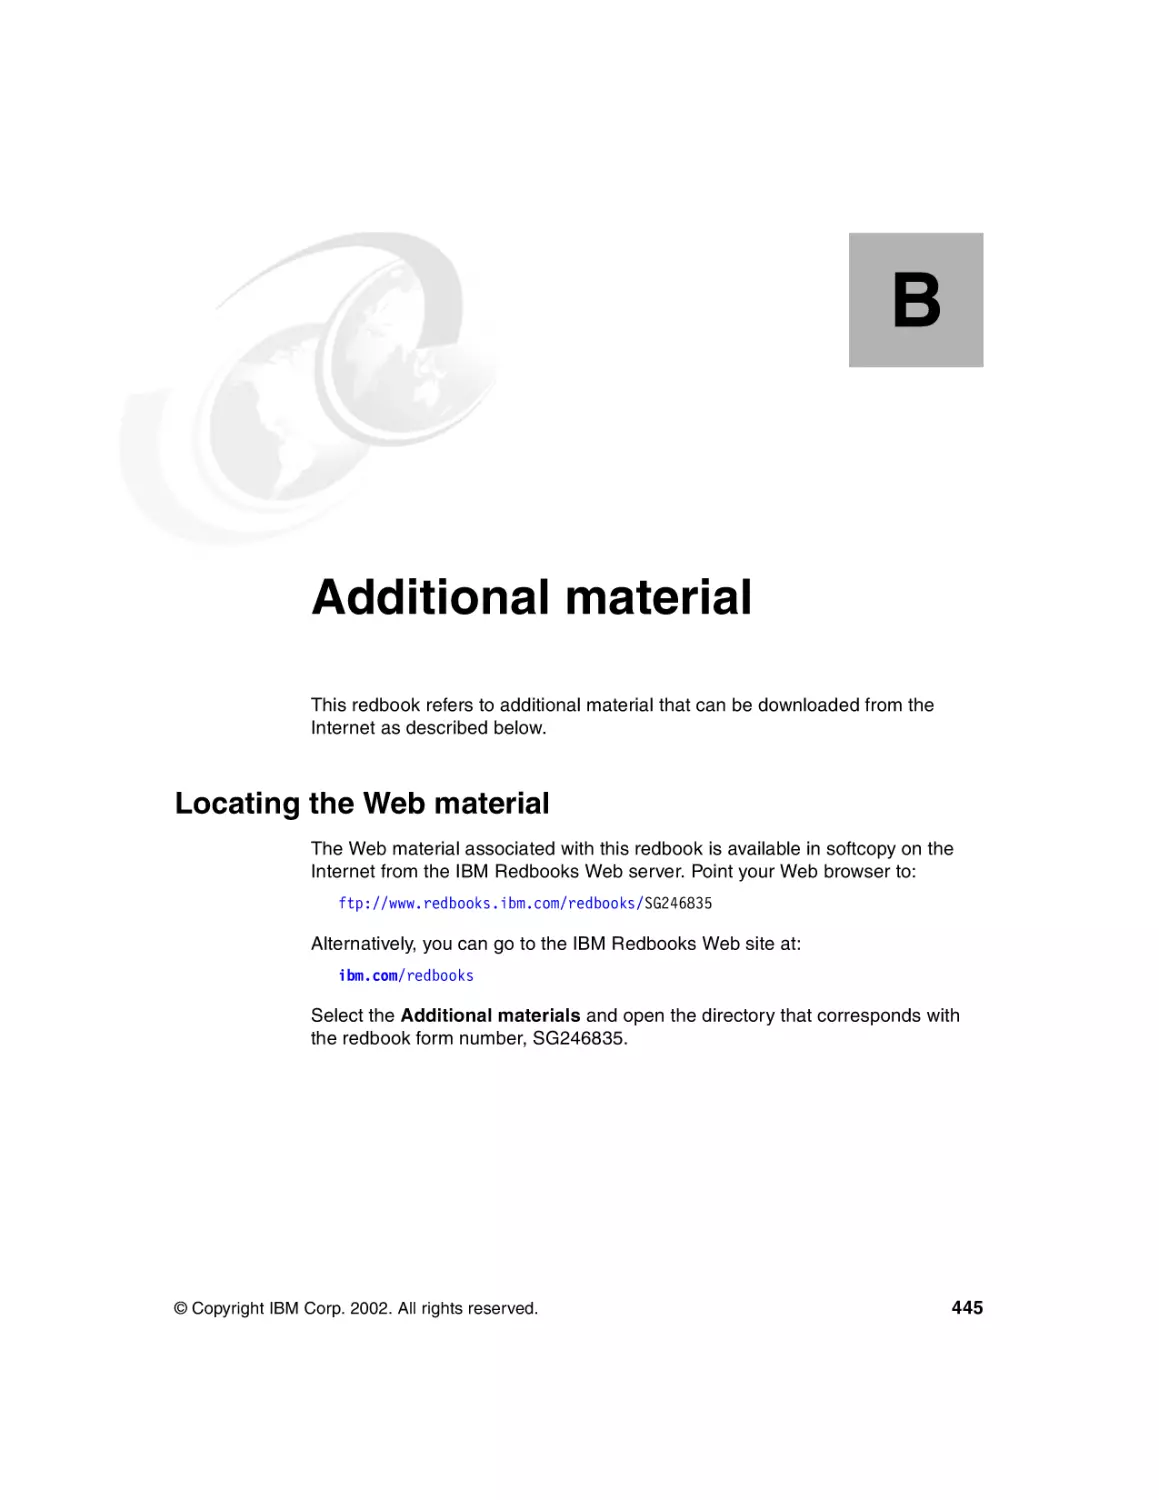 Appendix B. Additional material
Locating the Web material